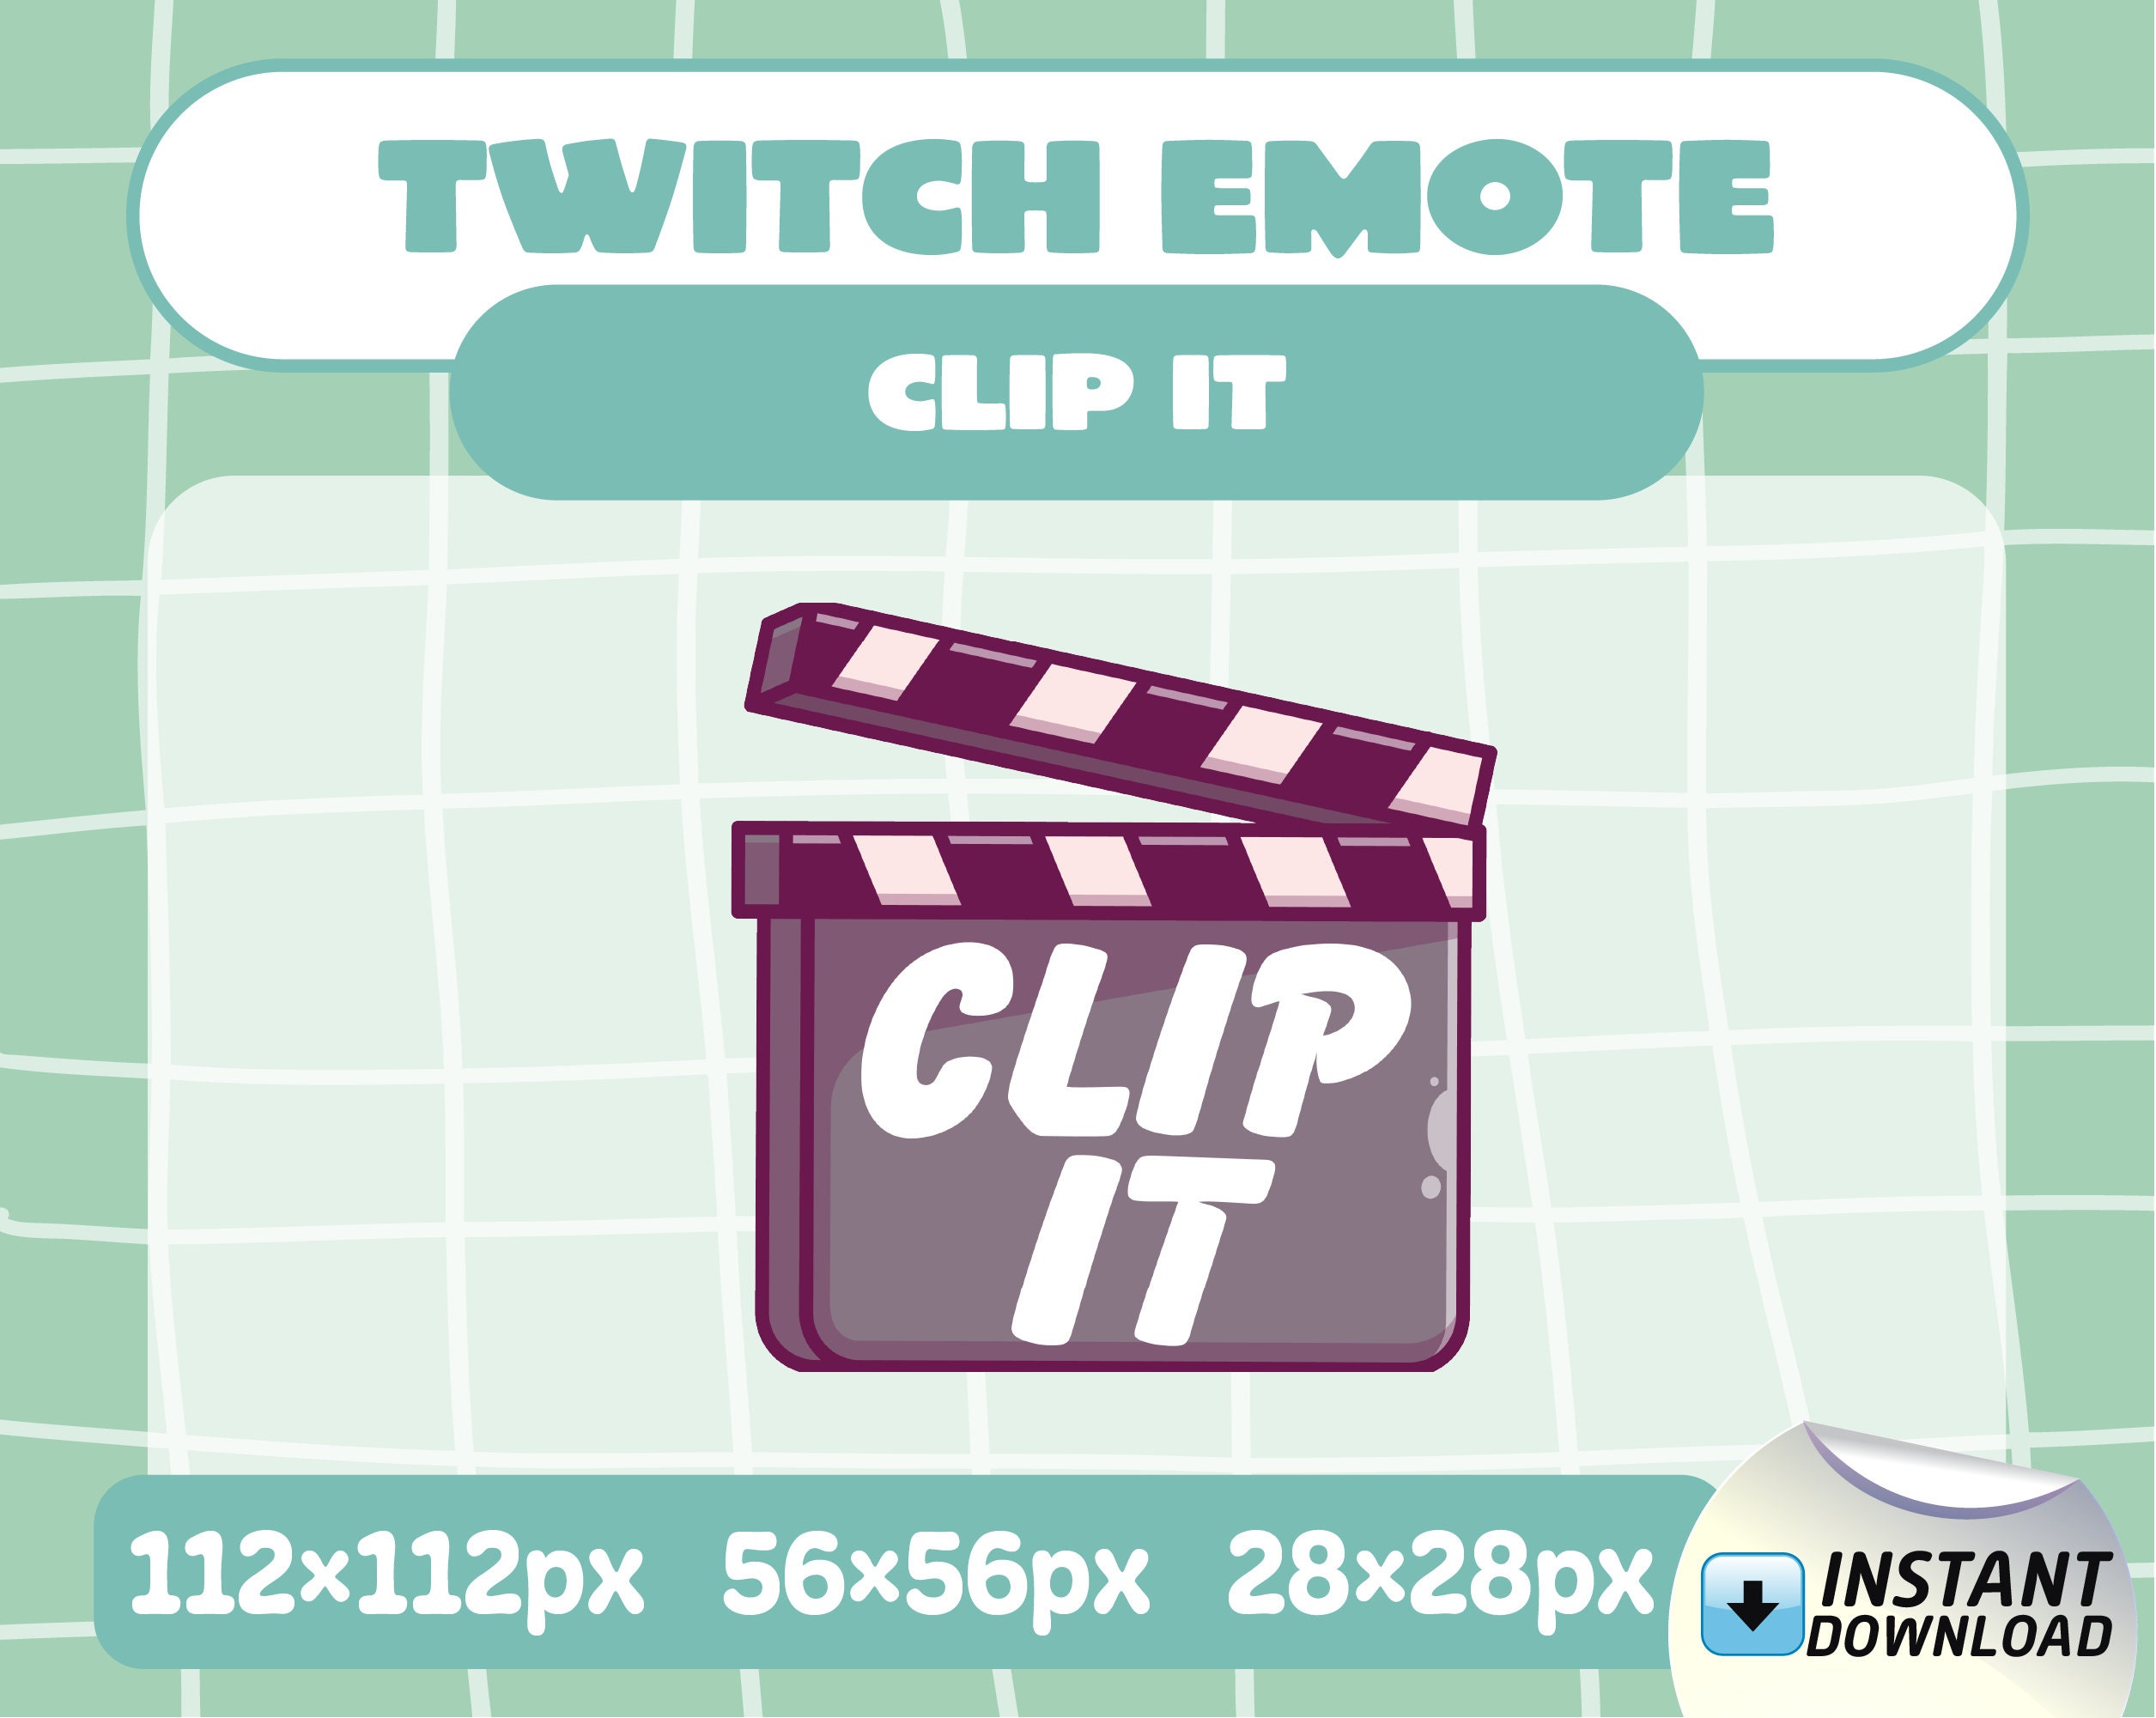 How To Clip In Twitch